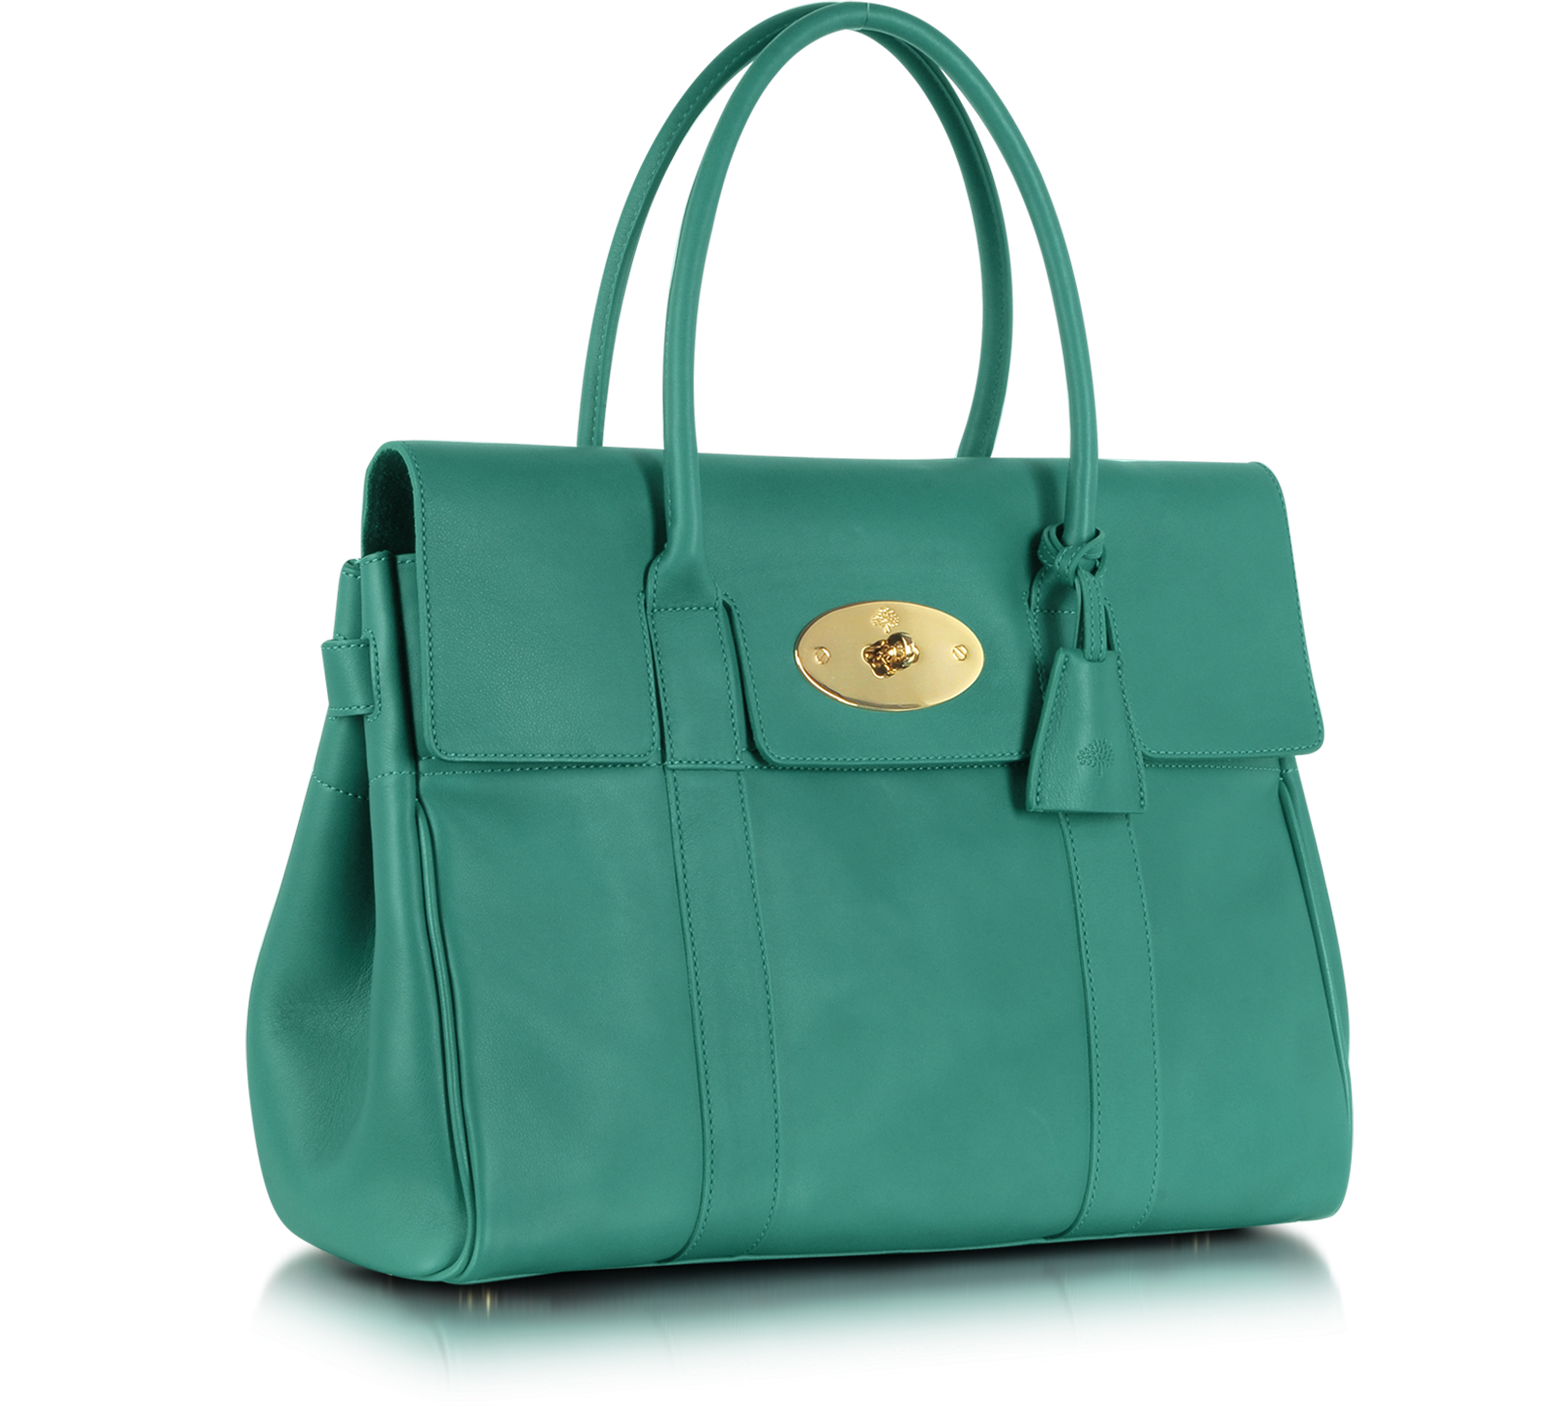 Mulberry Bayswater Emerald Green Micrograin Calf Leather Tote at FORZIERI